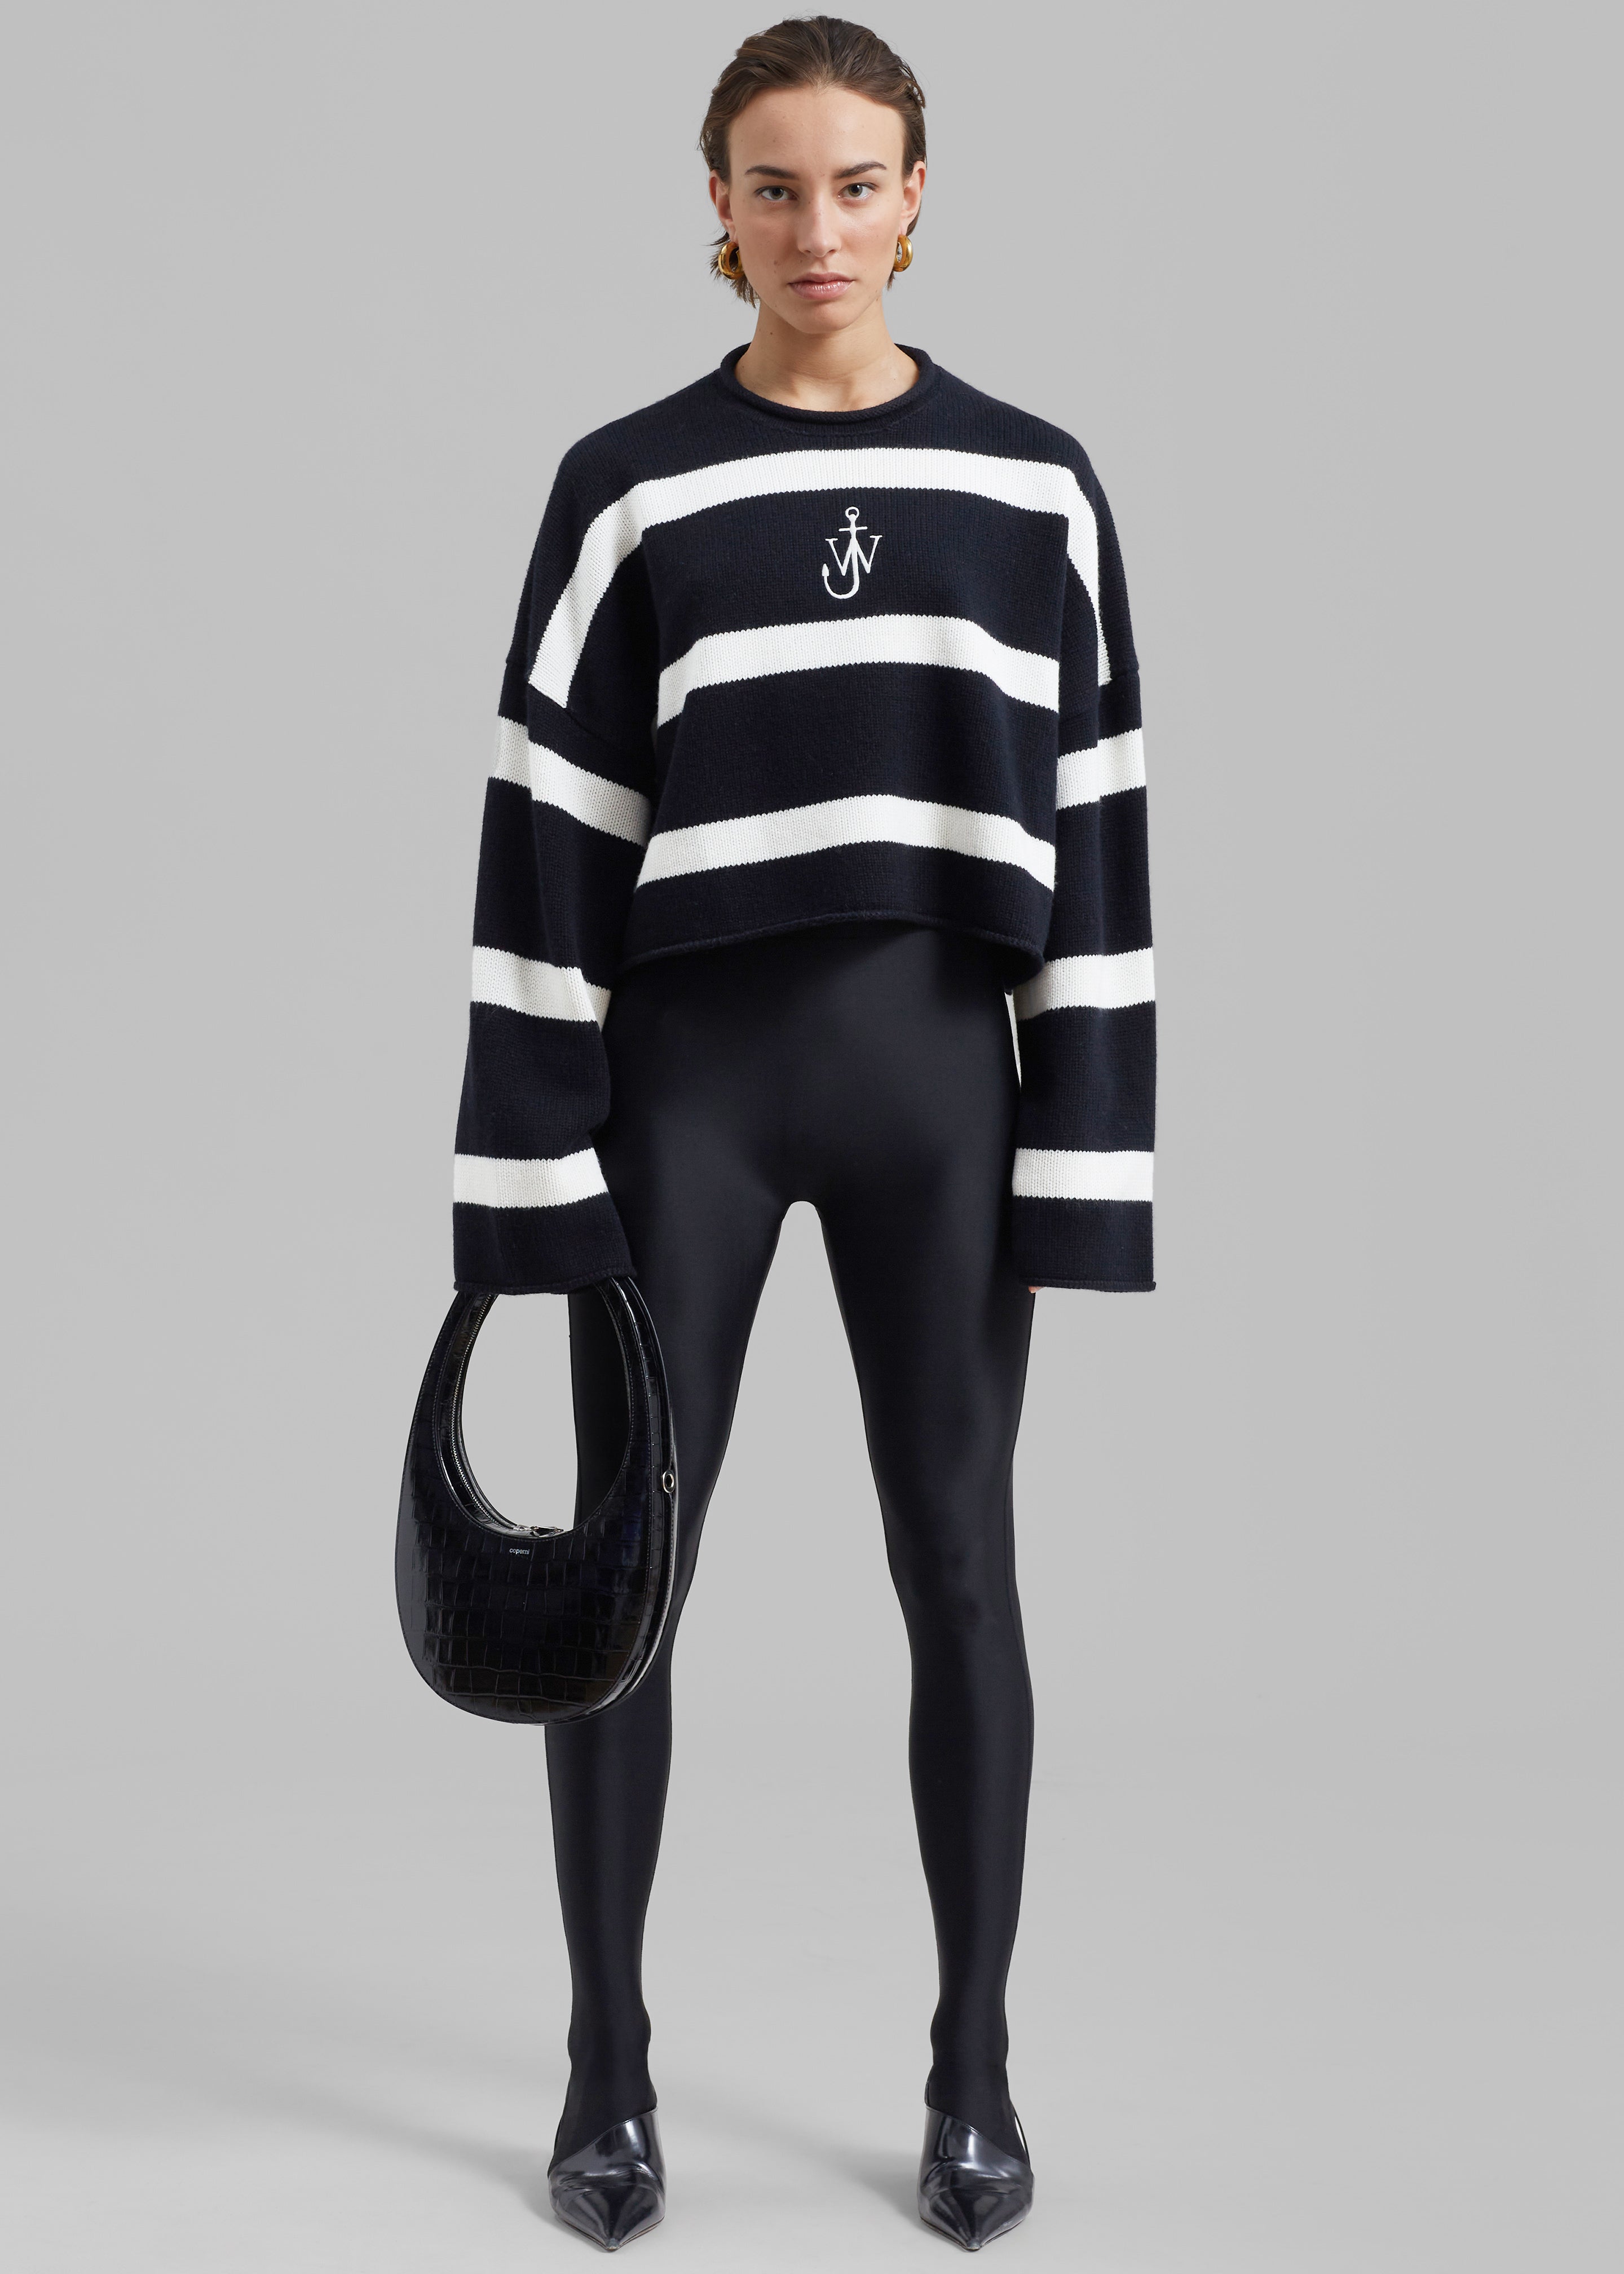 JW Anderson Cropped Anchor Jumper - Black/White - 2